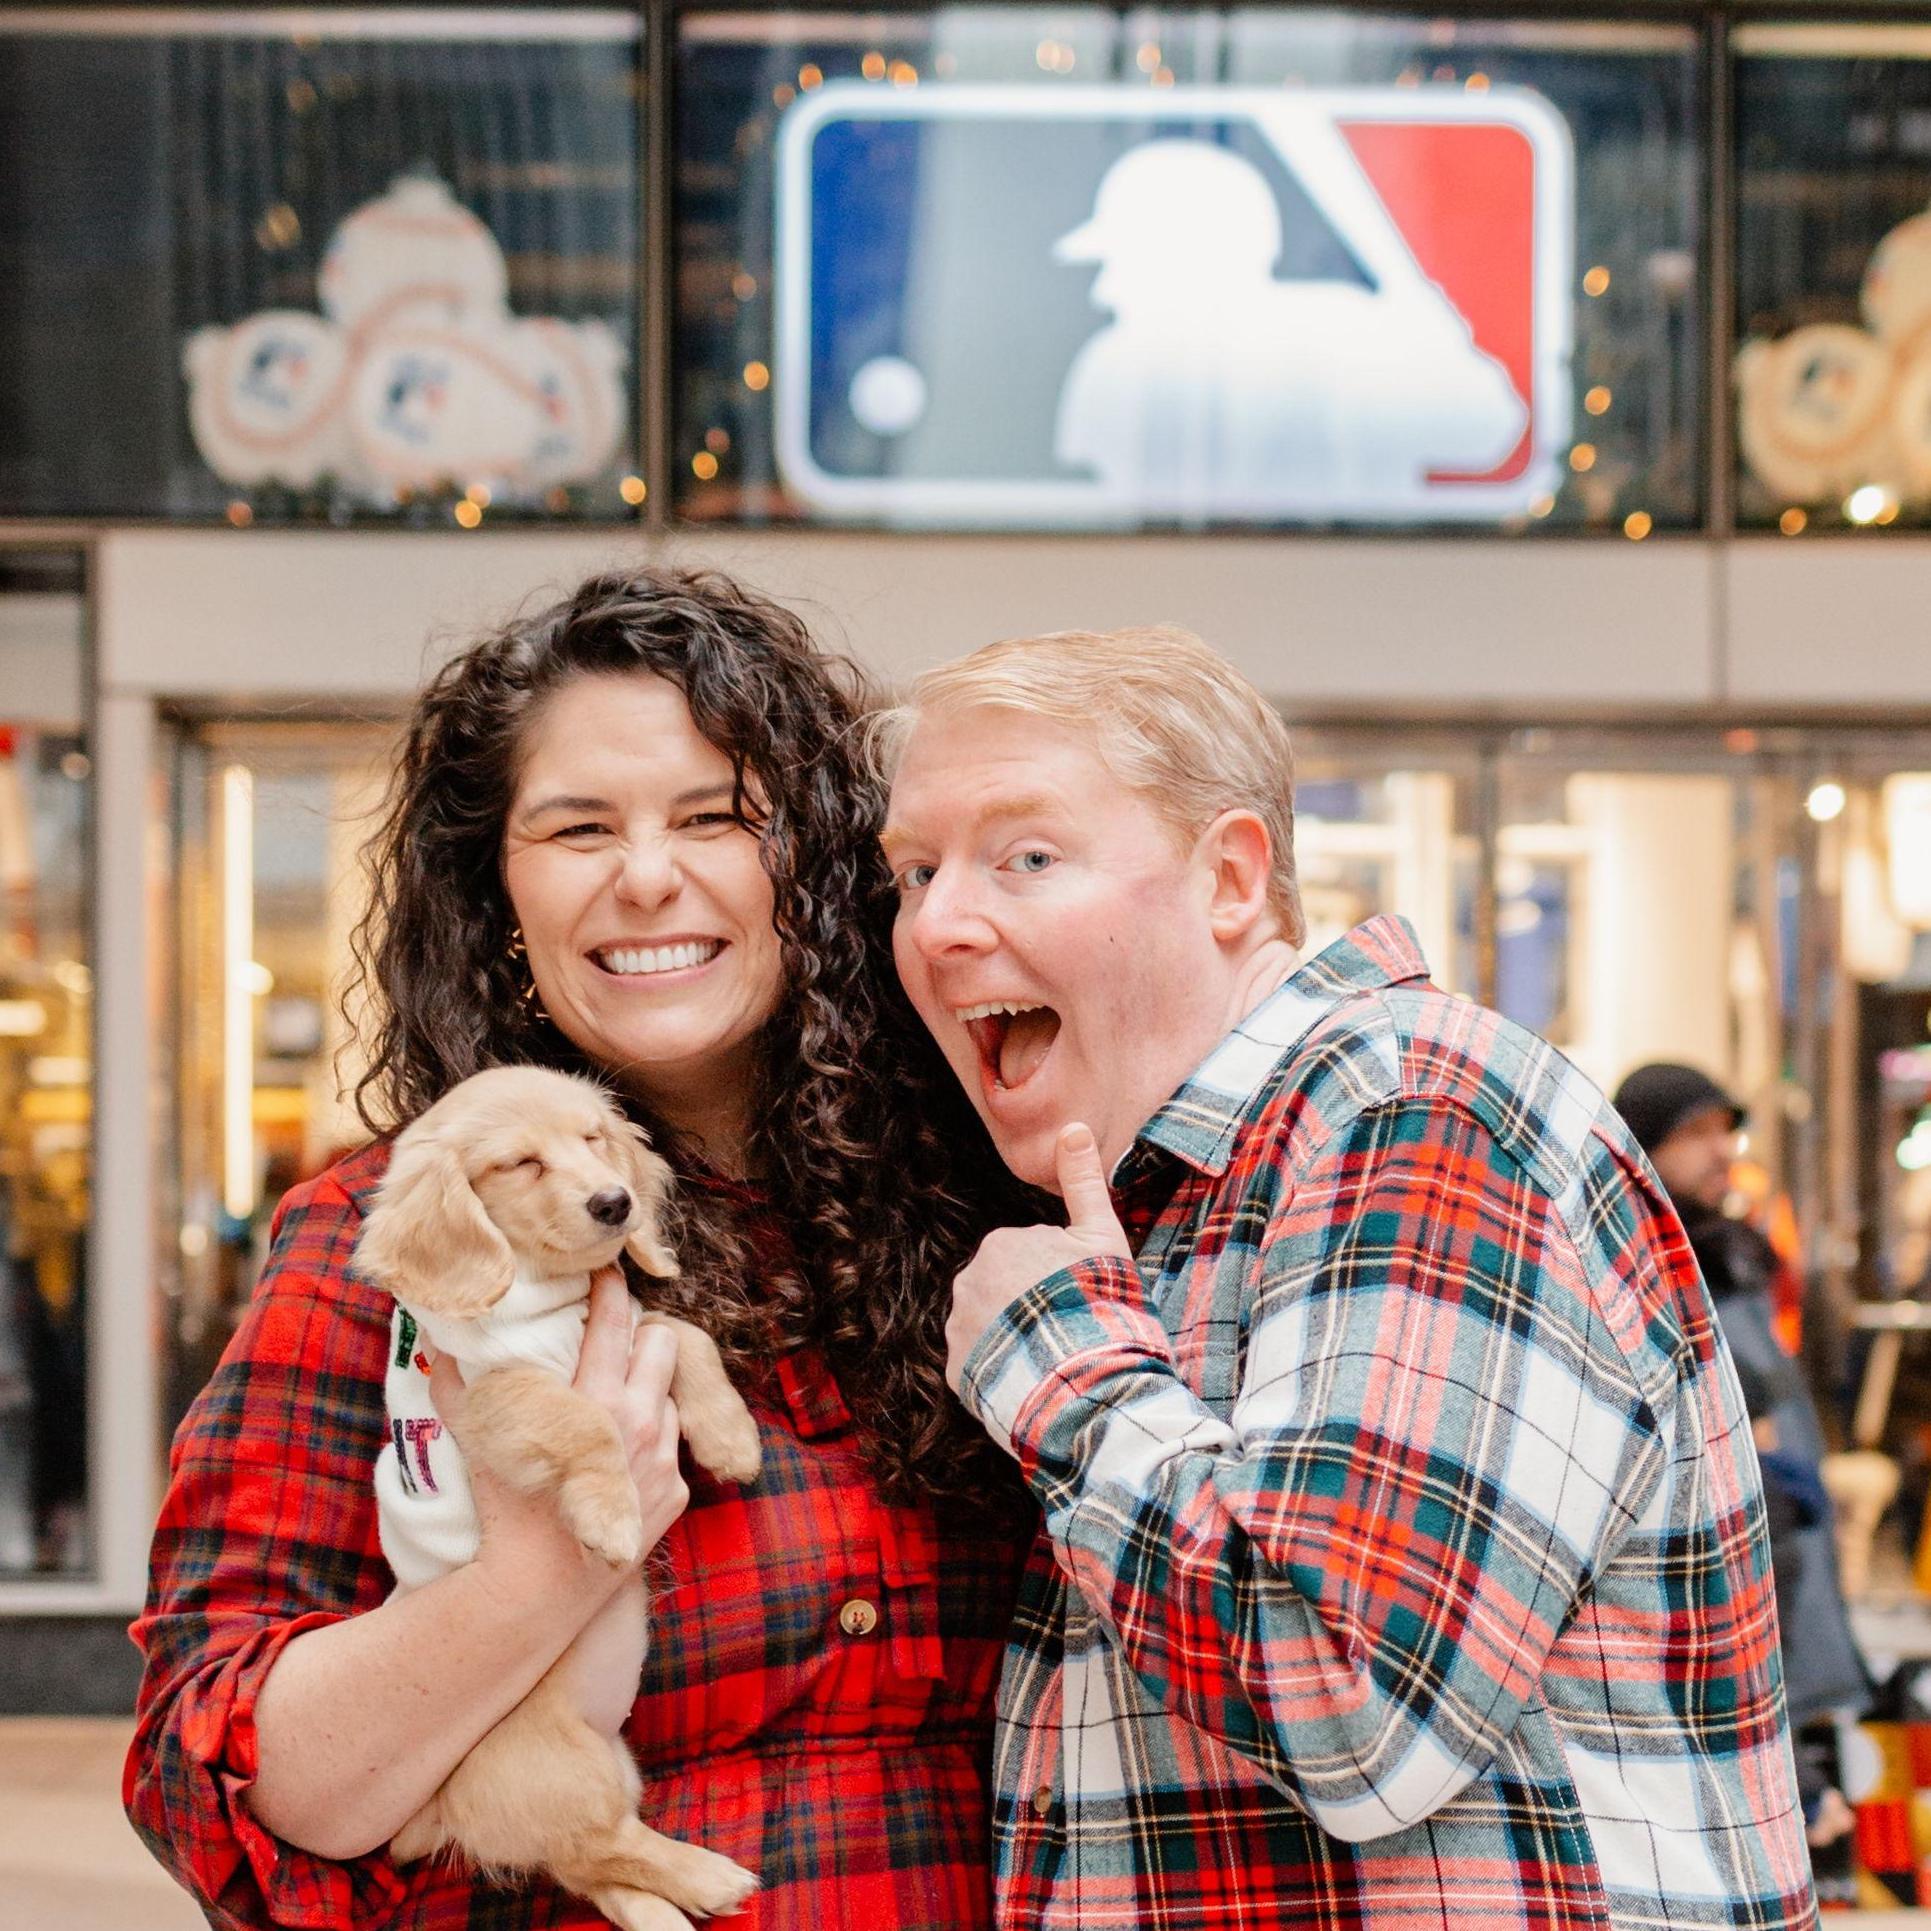 Christmas photos outside the MLB store.